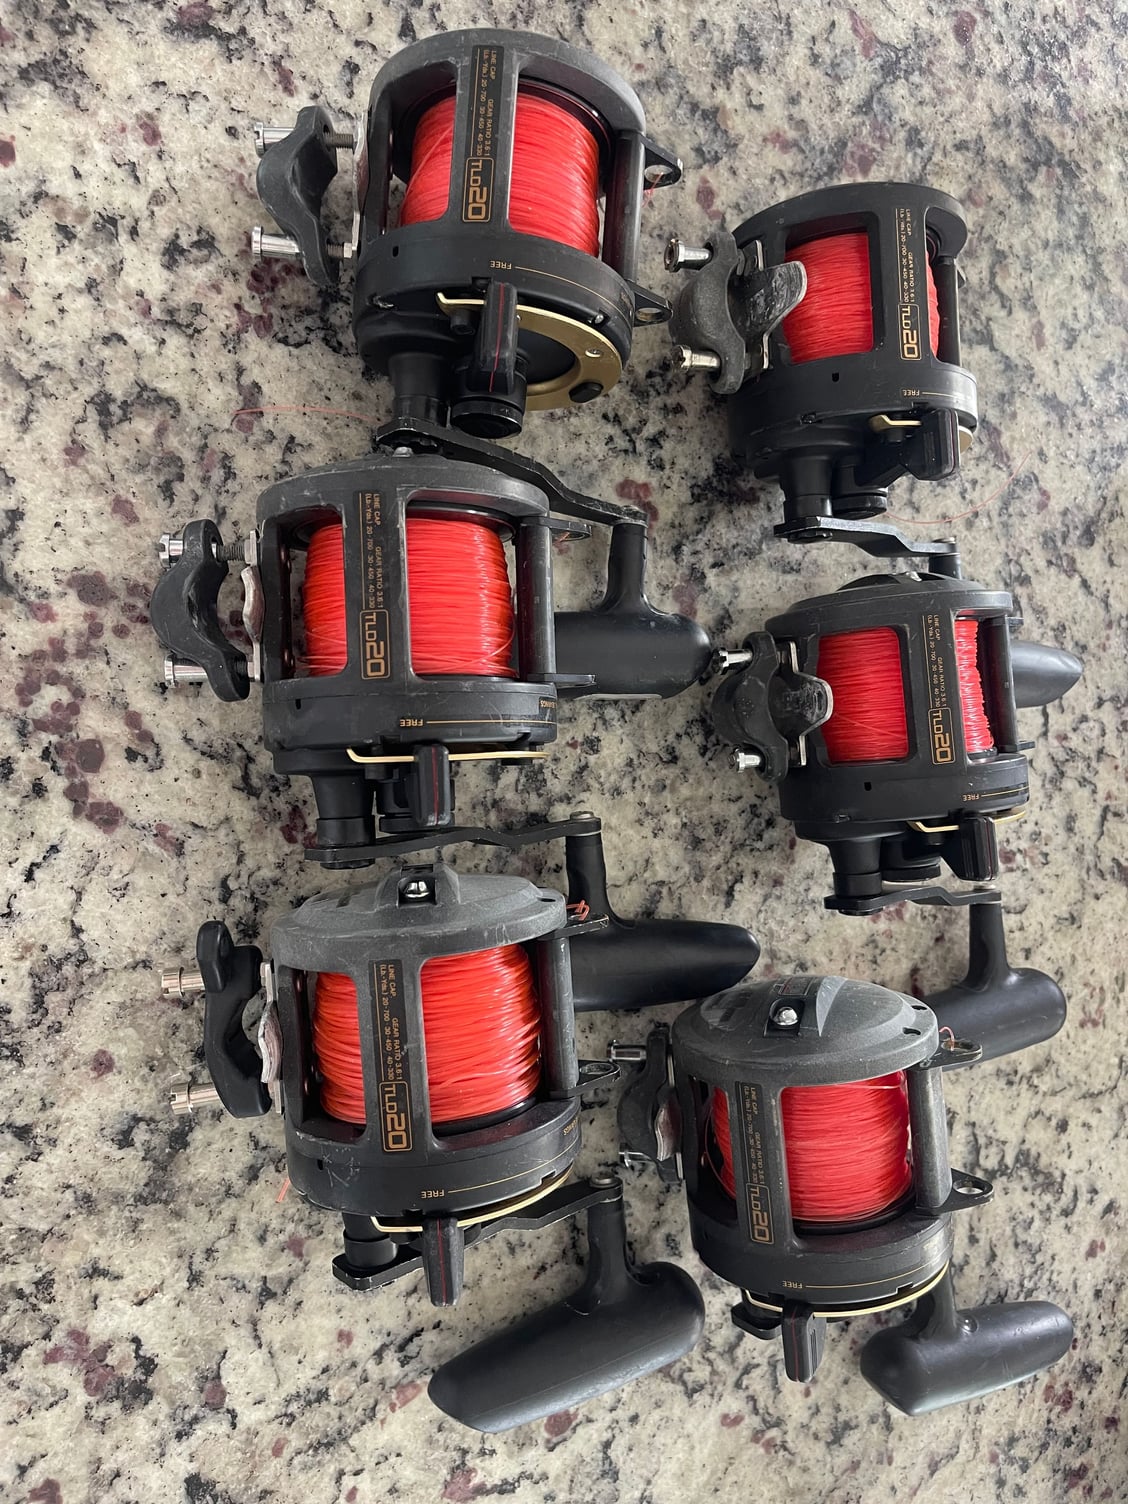 Reels for Sale: Shimano, Daiwa, Fin-Nor - The Hull Truth - Boating